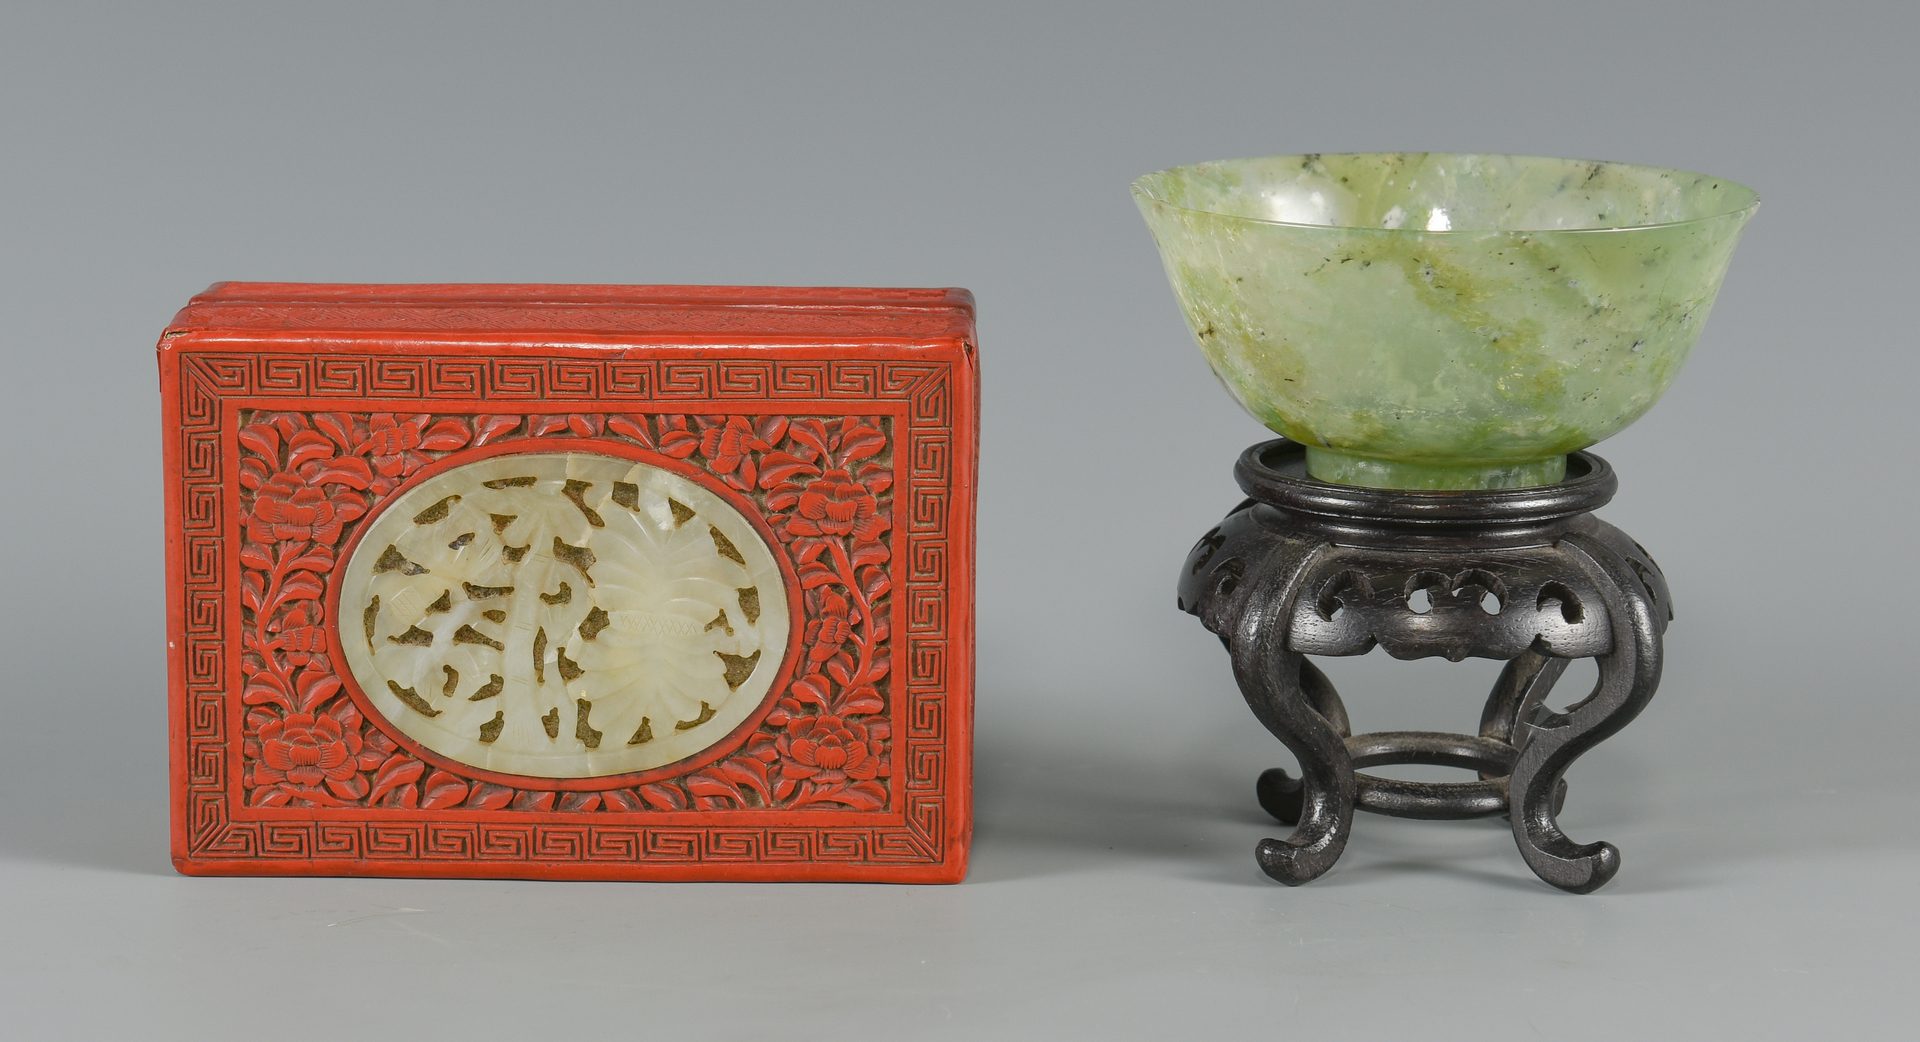 Lot 249: 9 Chinese Decorative Items